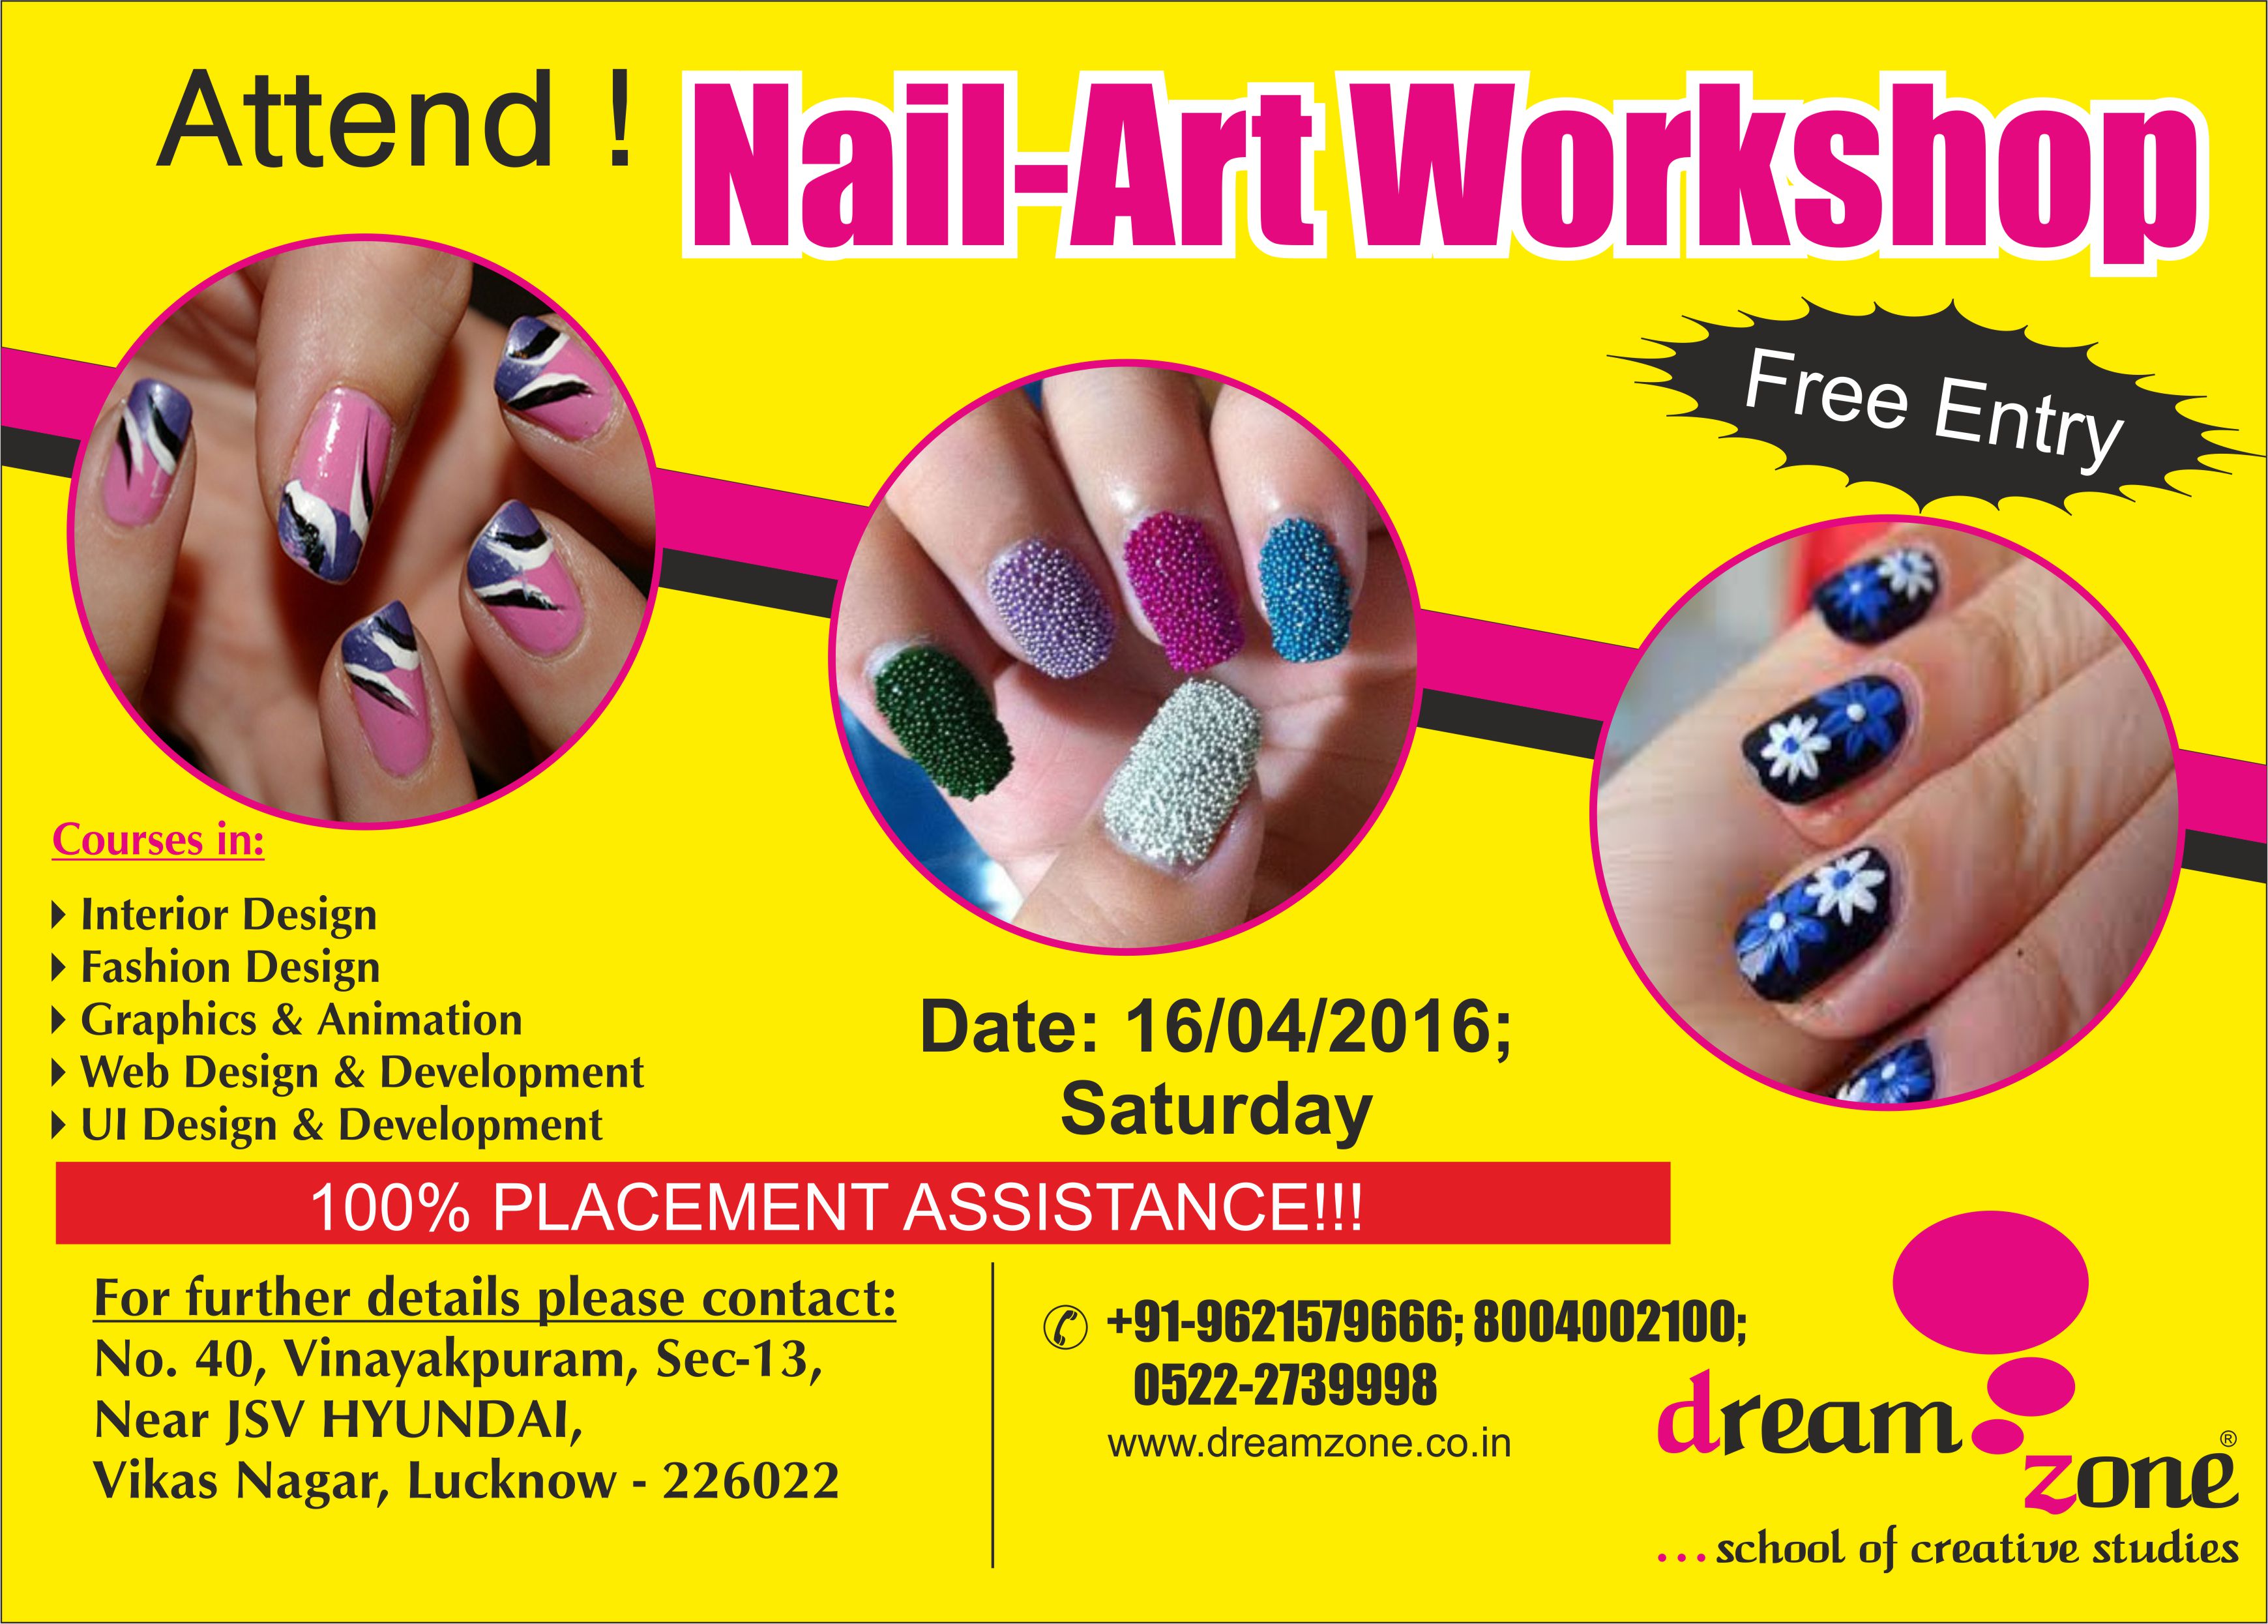 Top Nail Art Training Institutes in Mumbai - Best Nail Art Course - Justdial